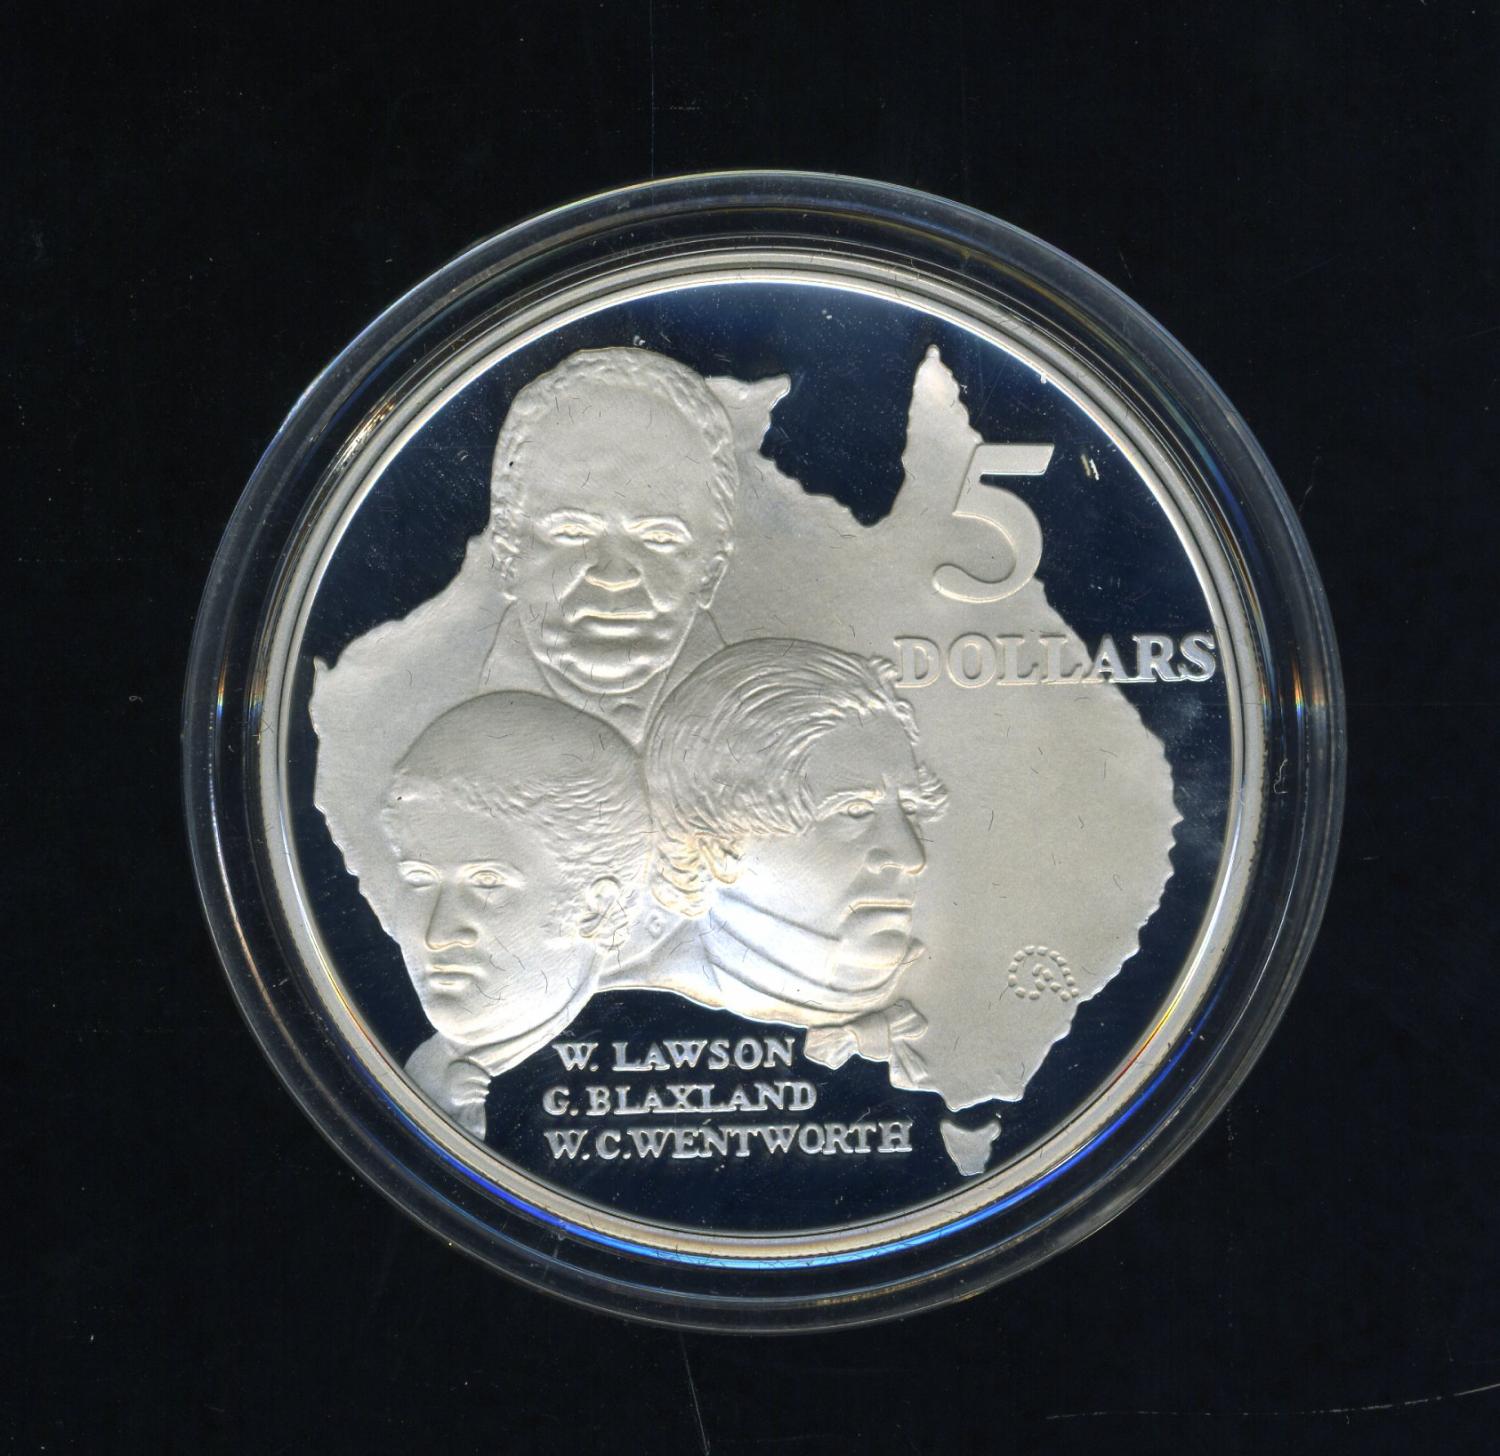 Thumbnail for 1993 Australian $5 Silver Coin from Masterpieces in Silver Set - lawson Blaxland Wentworth.  The Coin is Sterling Silver and contains over 1oz of Pure Silver.